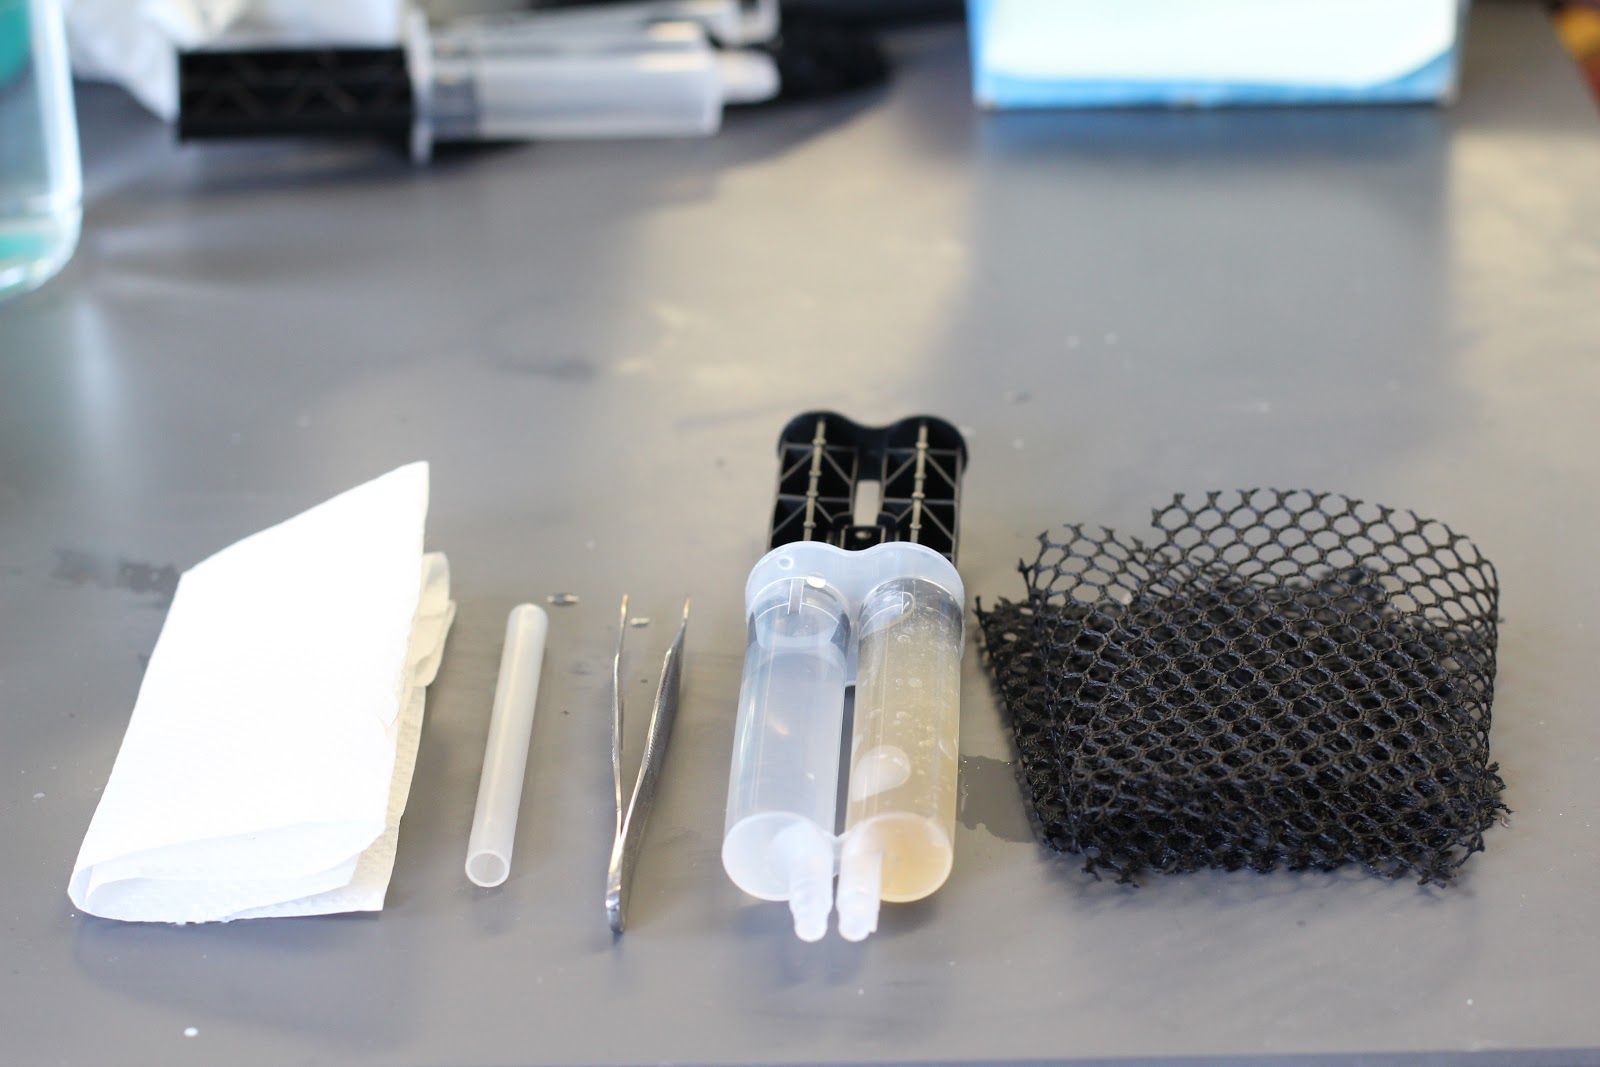 A photo of the GelAid components, including a tube, dual tubes with liquid in one and gel in the other, tweezers, and a black netting